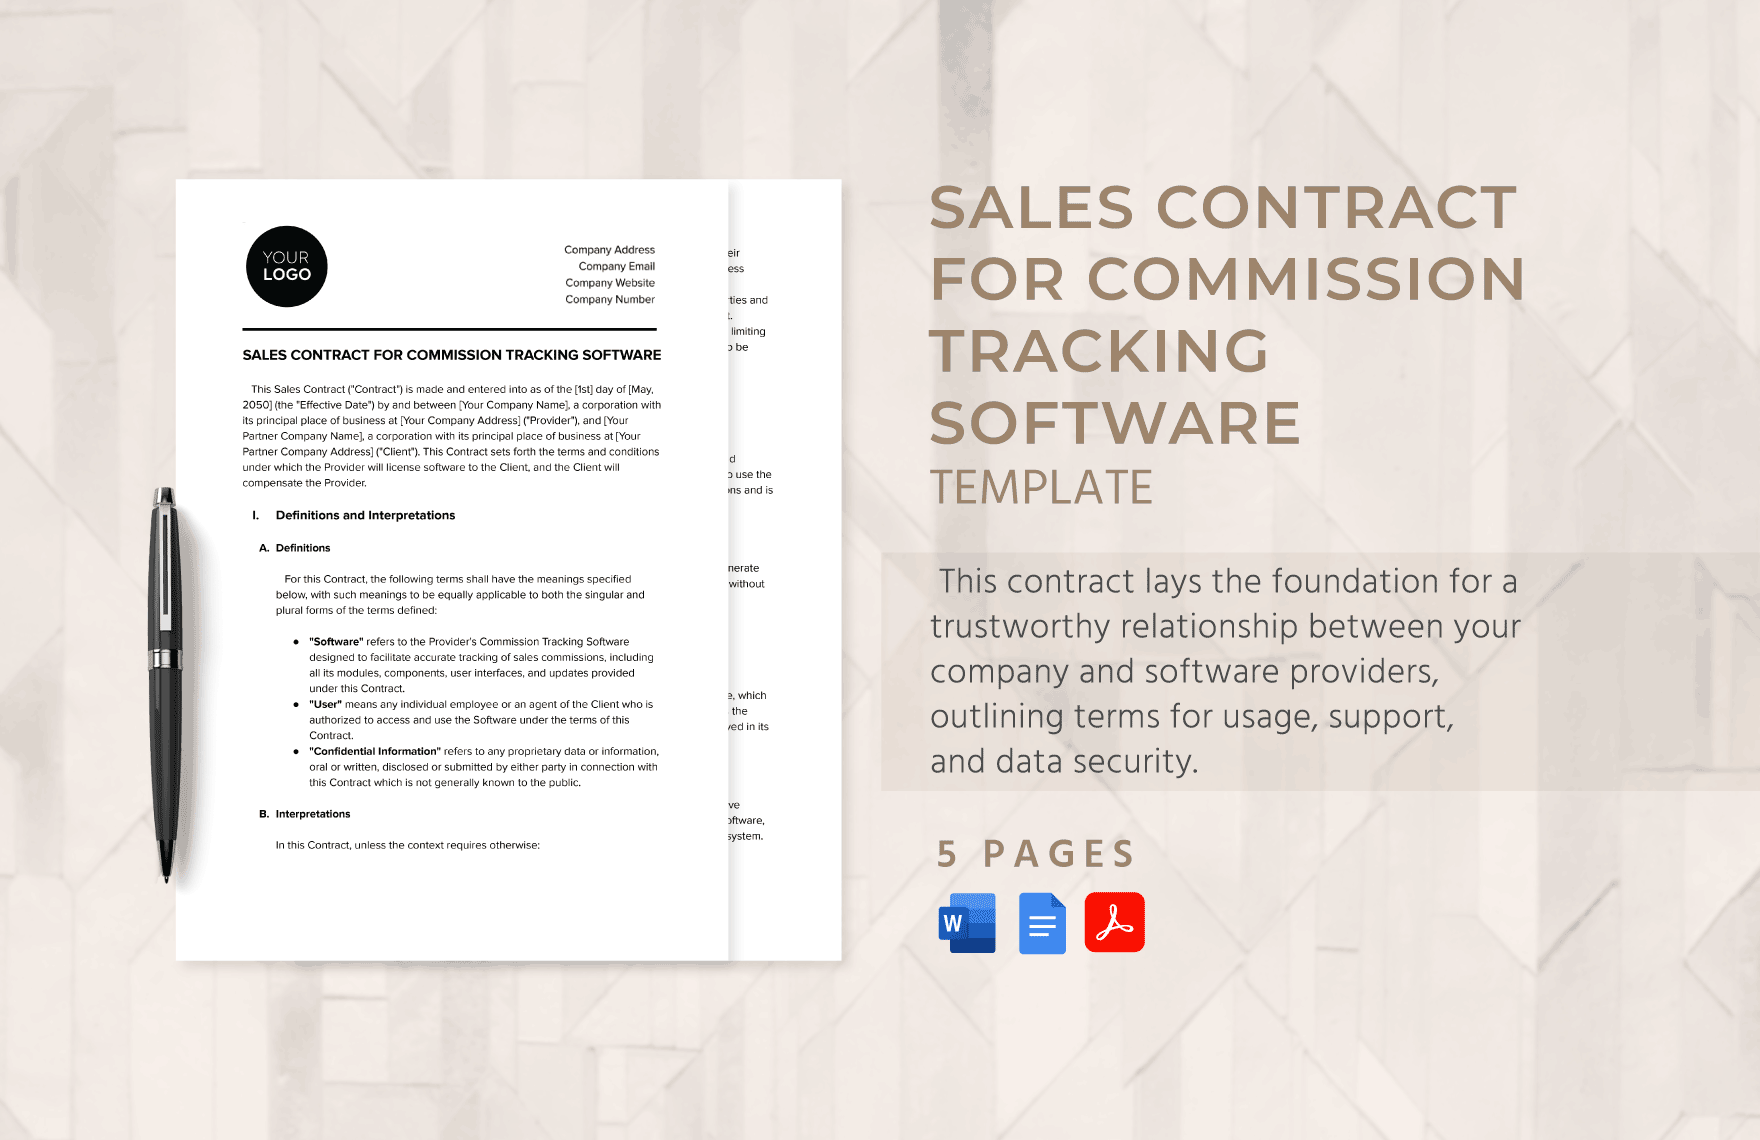 Sales Contract for Commission Tracking Software Template